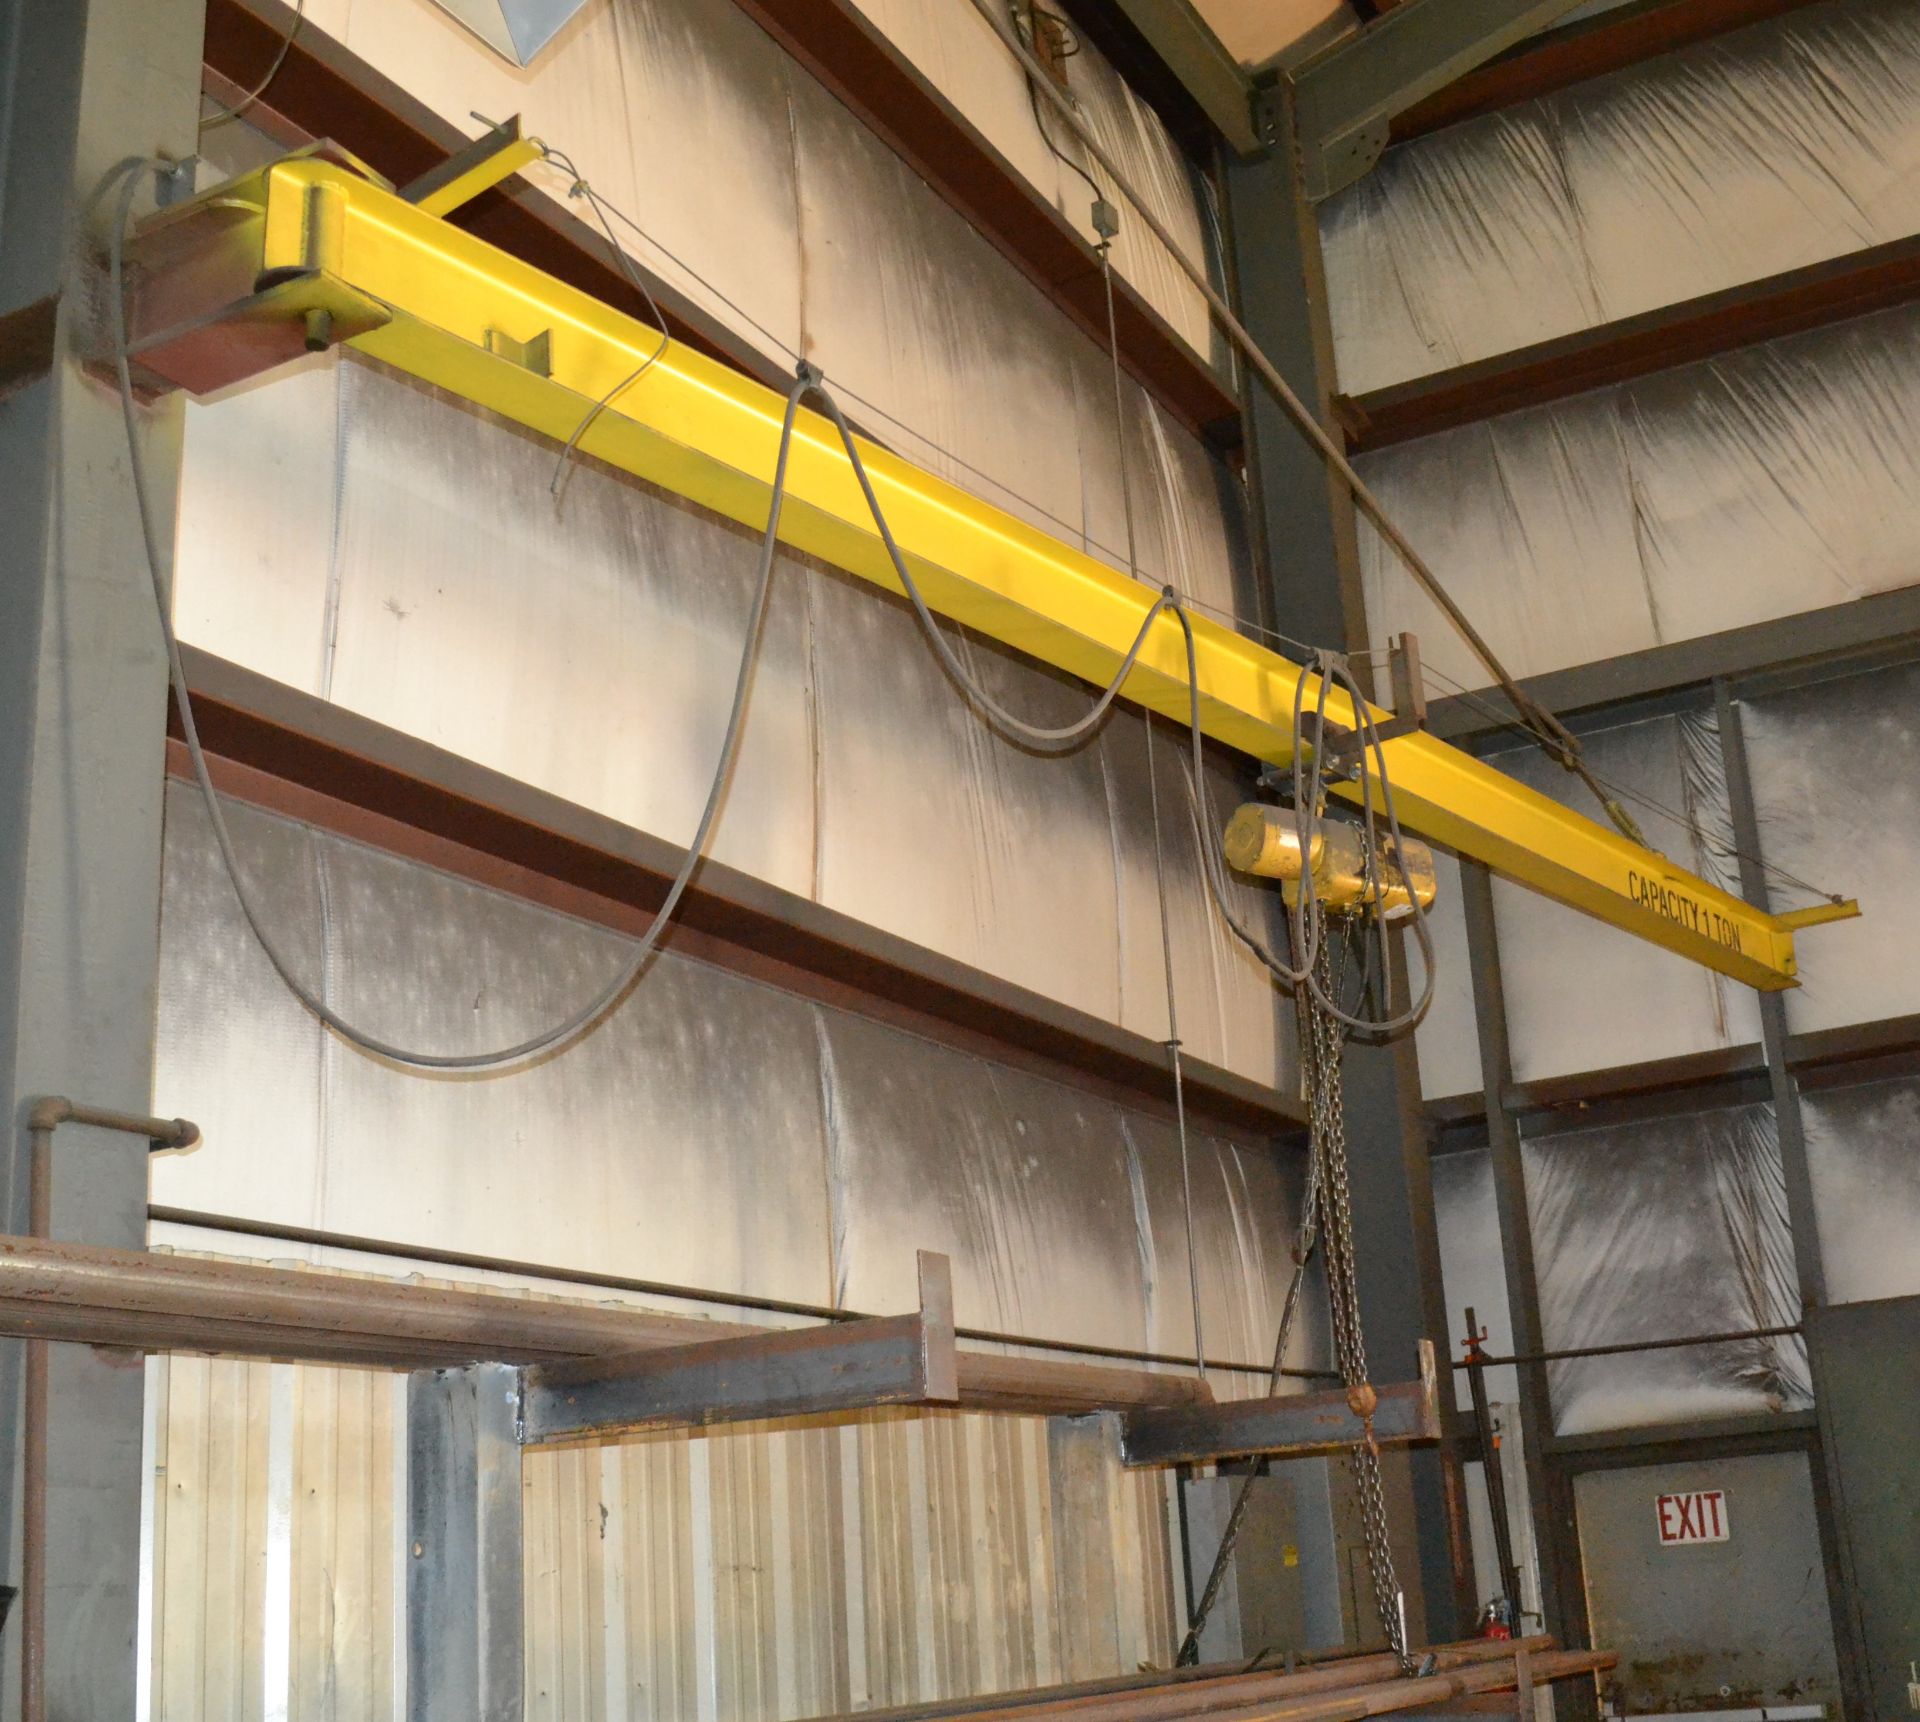 1-Ton Post Mounted Jib Crane, Approximately 21', With 1-Ton Yale Electric Hoist